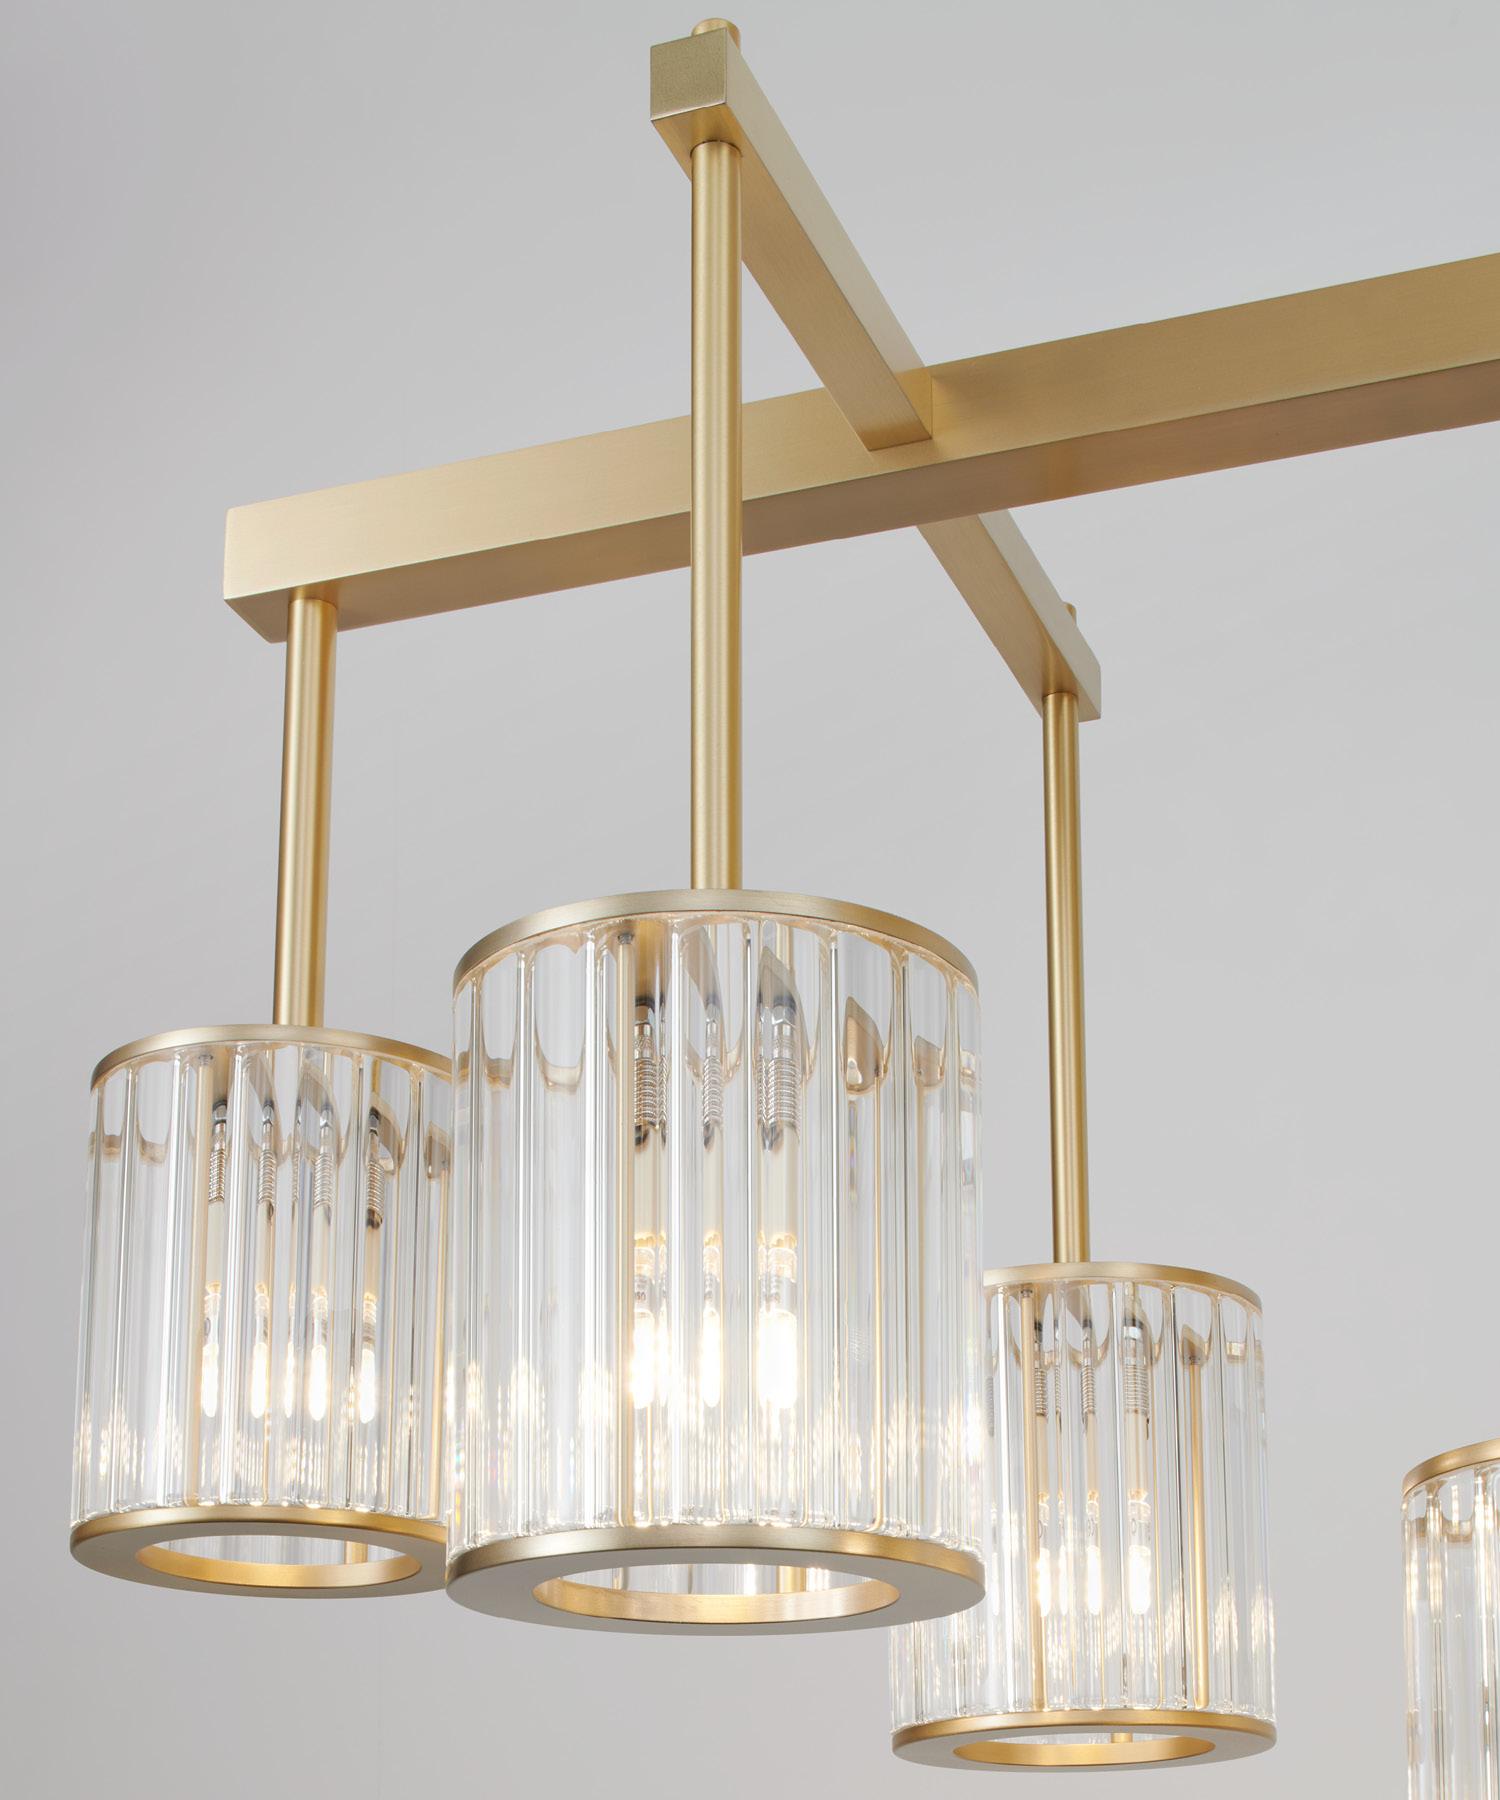 British Flute Beam Chandelier with 13 Arms in Brushed Brass and Clear Glass Diffusers For Sale